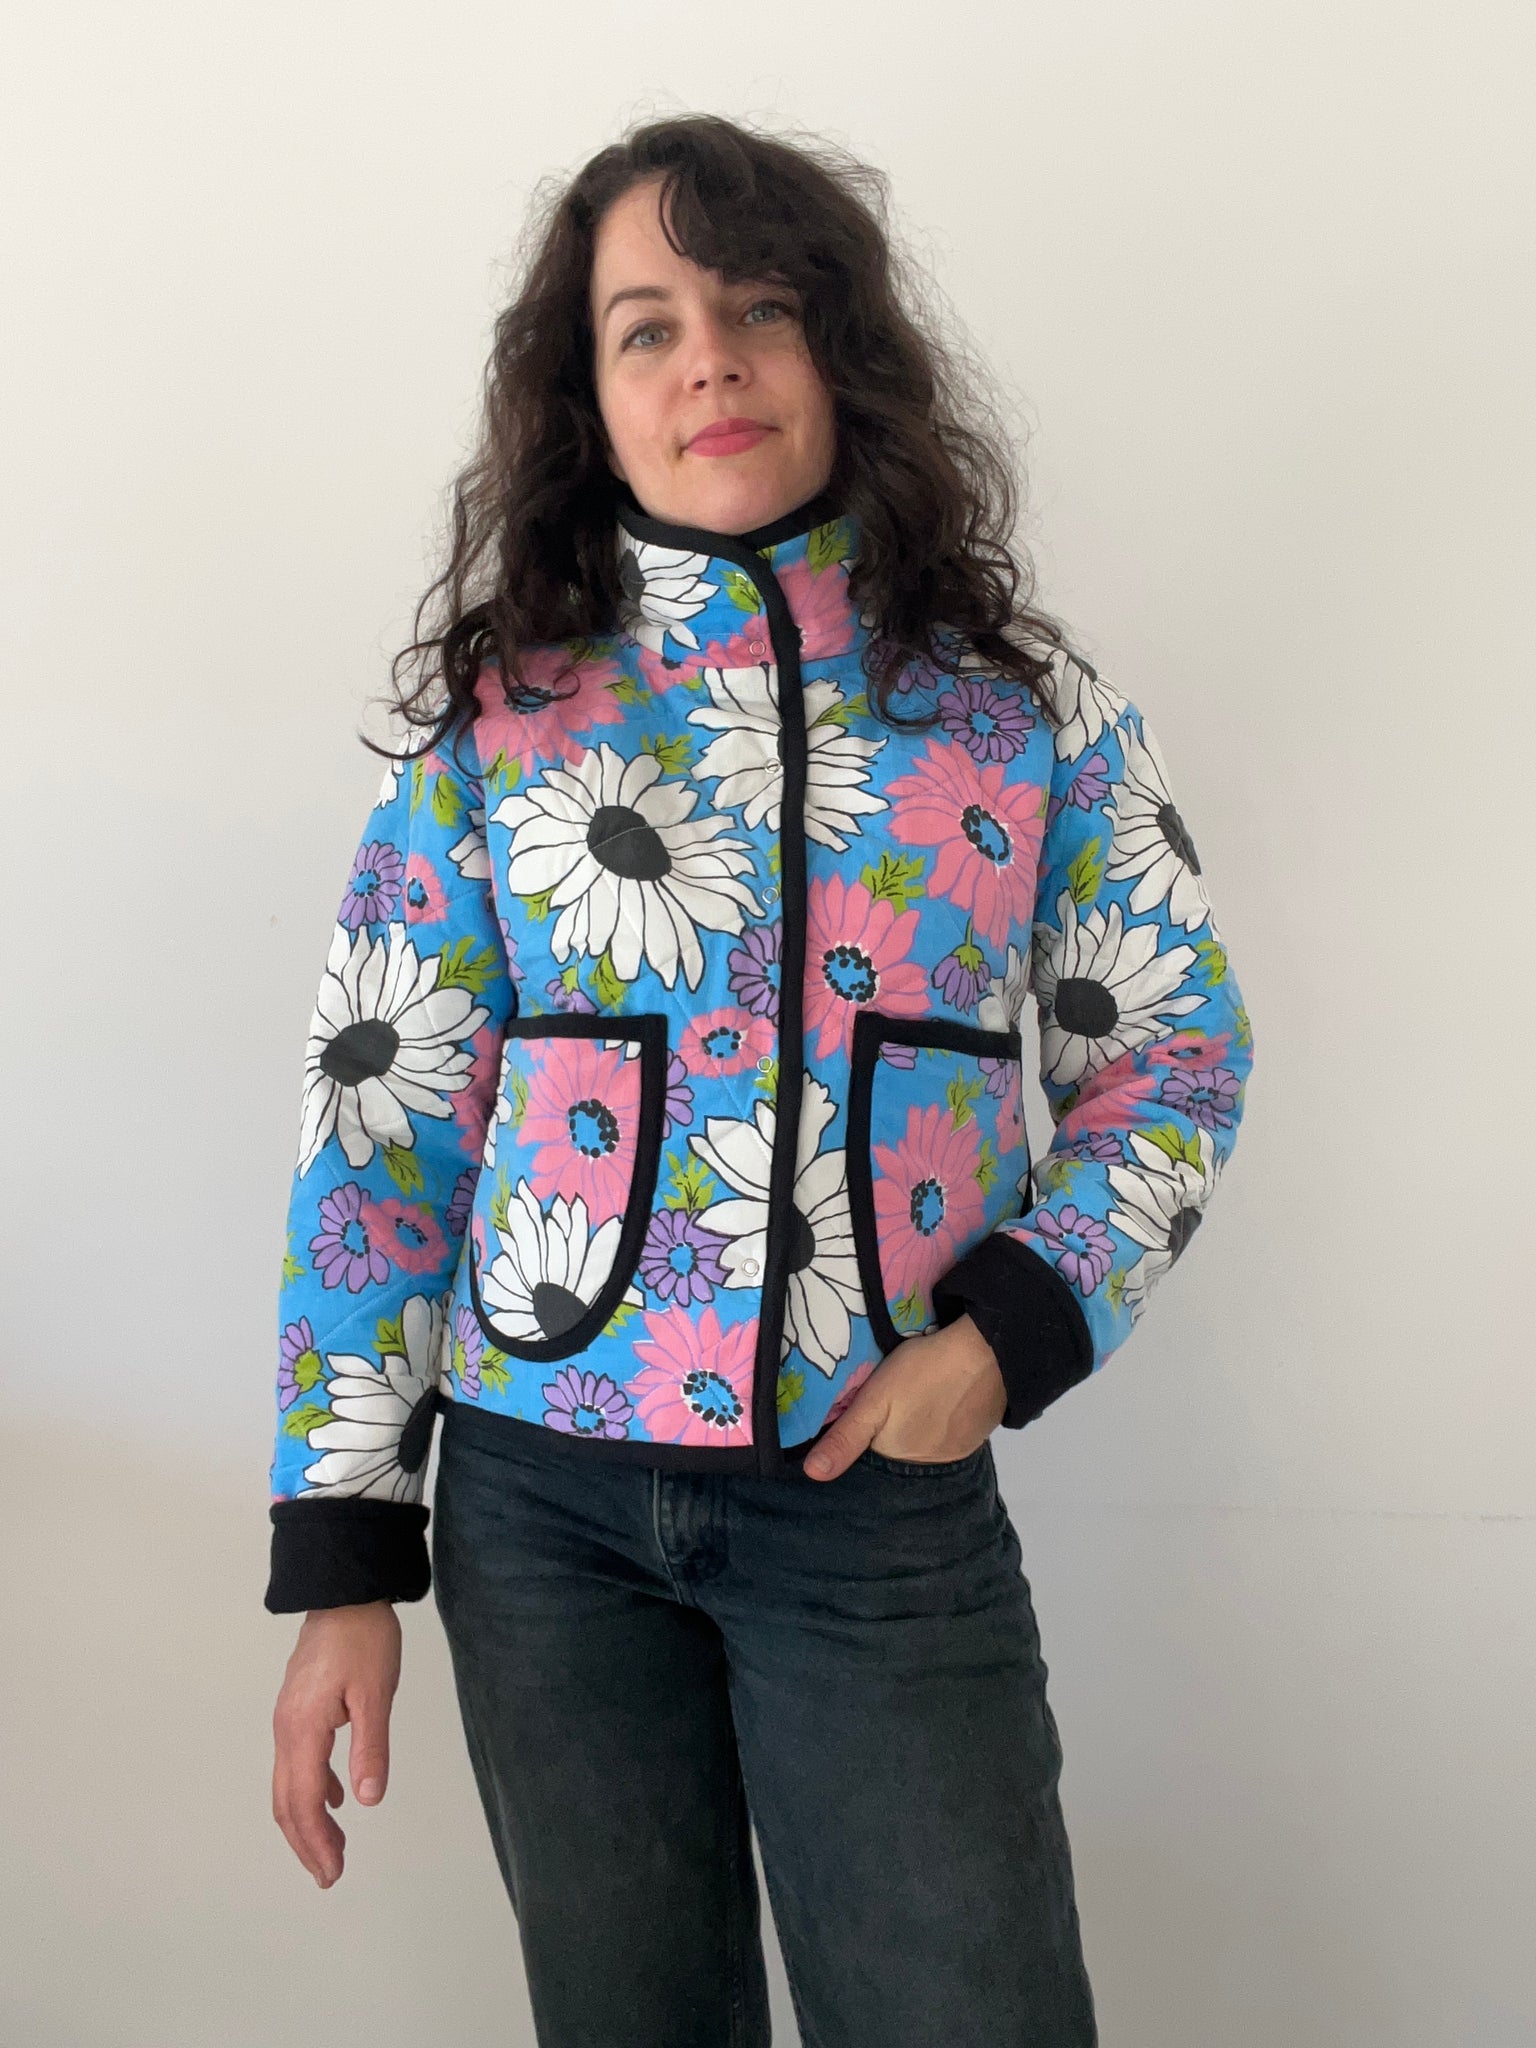 OOAK quilted jacket made from vintage floral cotton